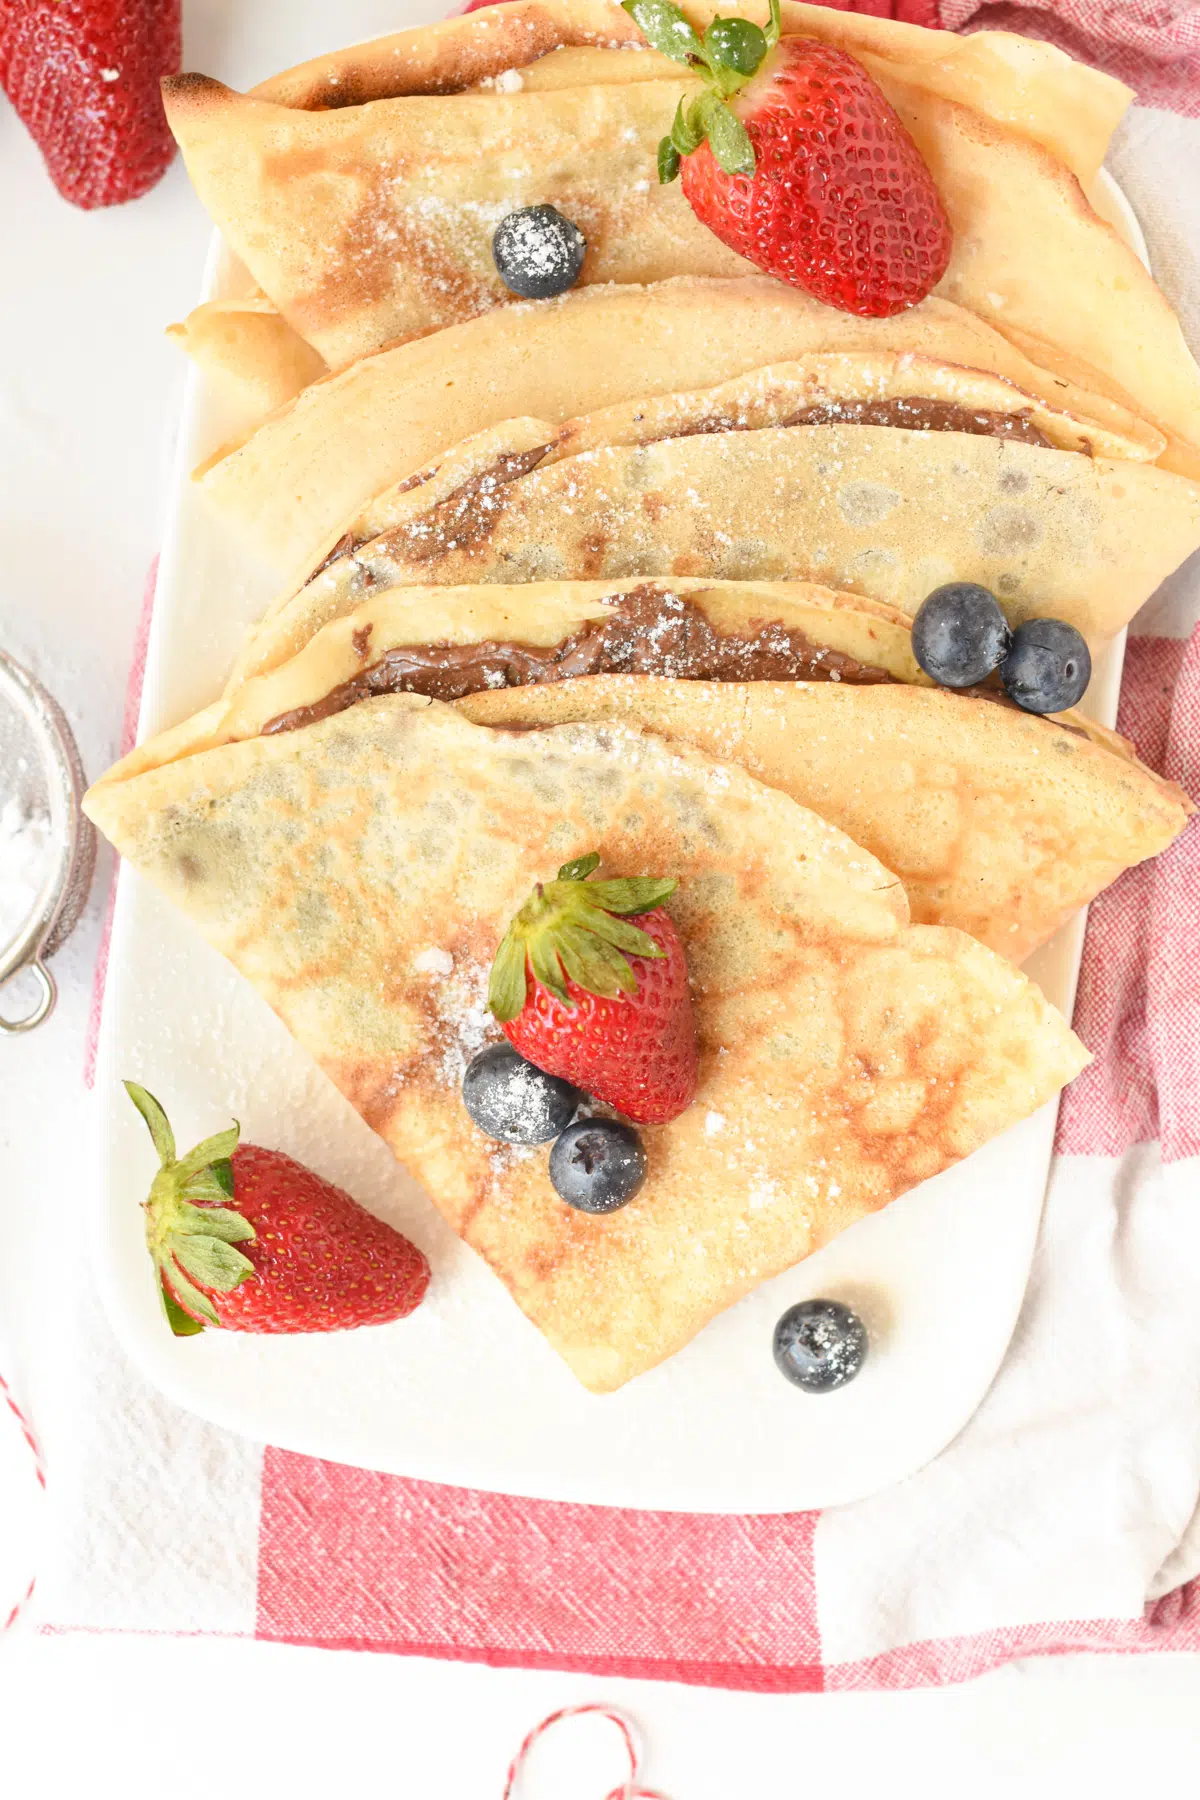 Best French Crepes